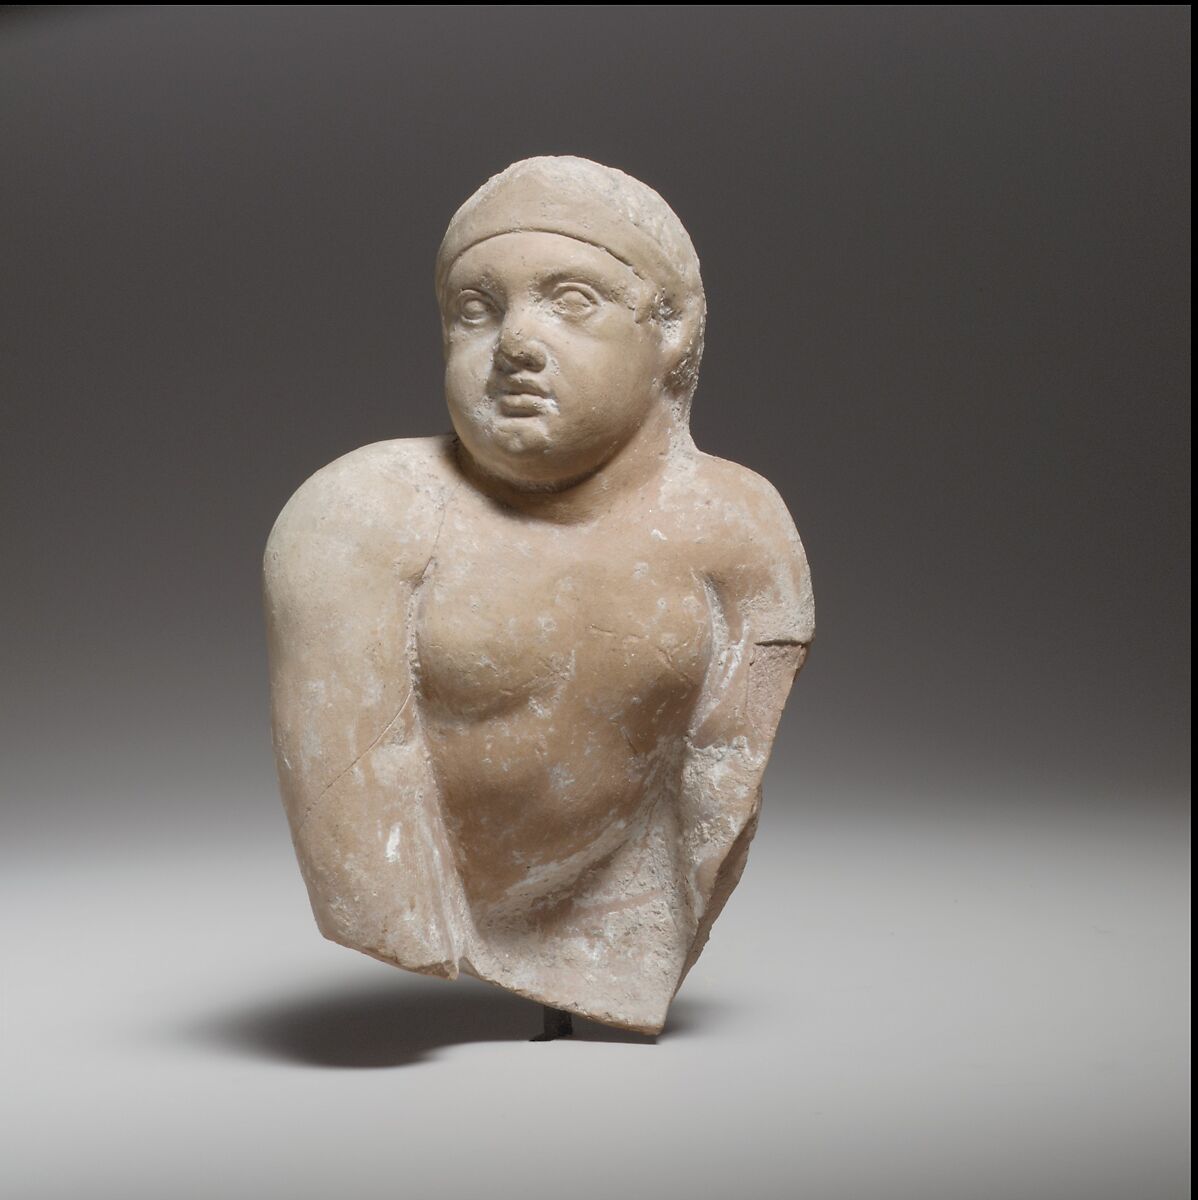 Terracotta statuette of a seated or crawling boy, Terracotta, Cypriot 